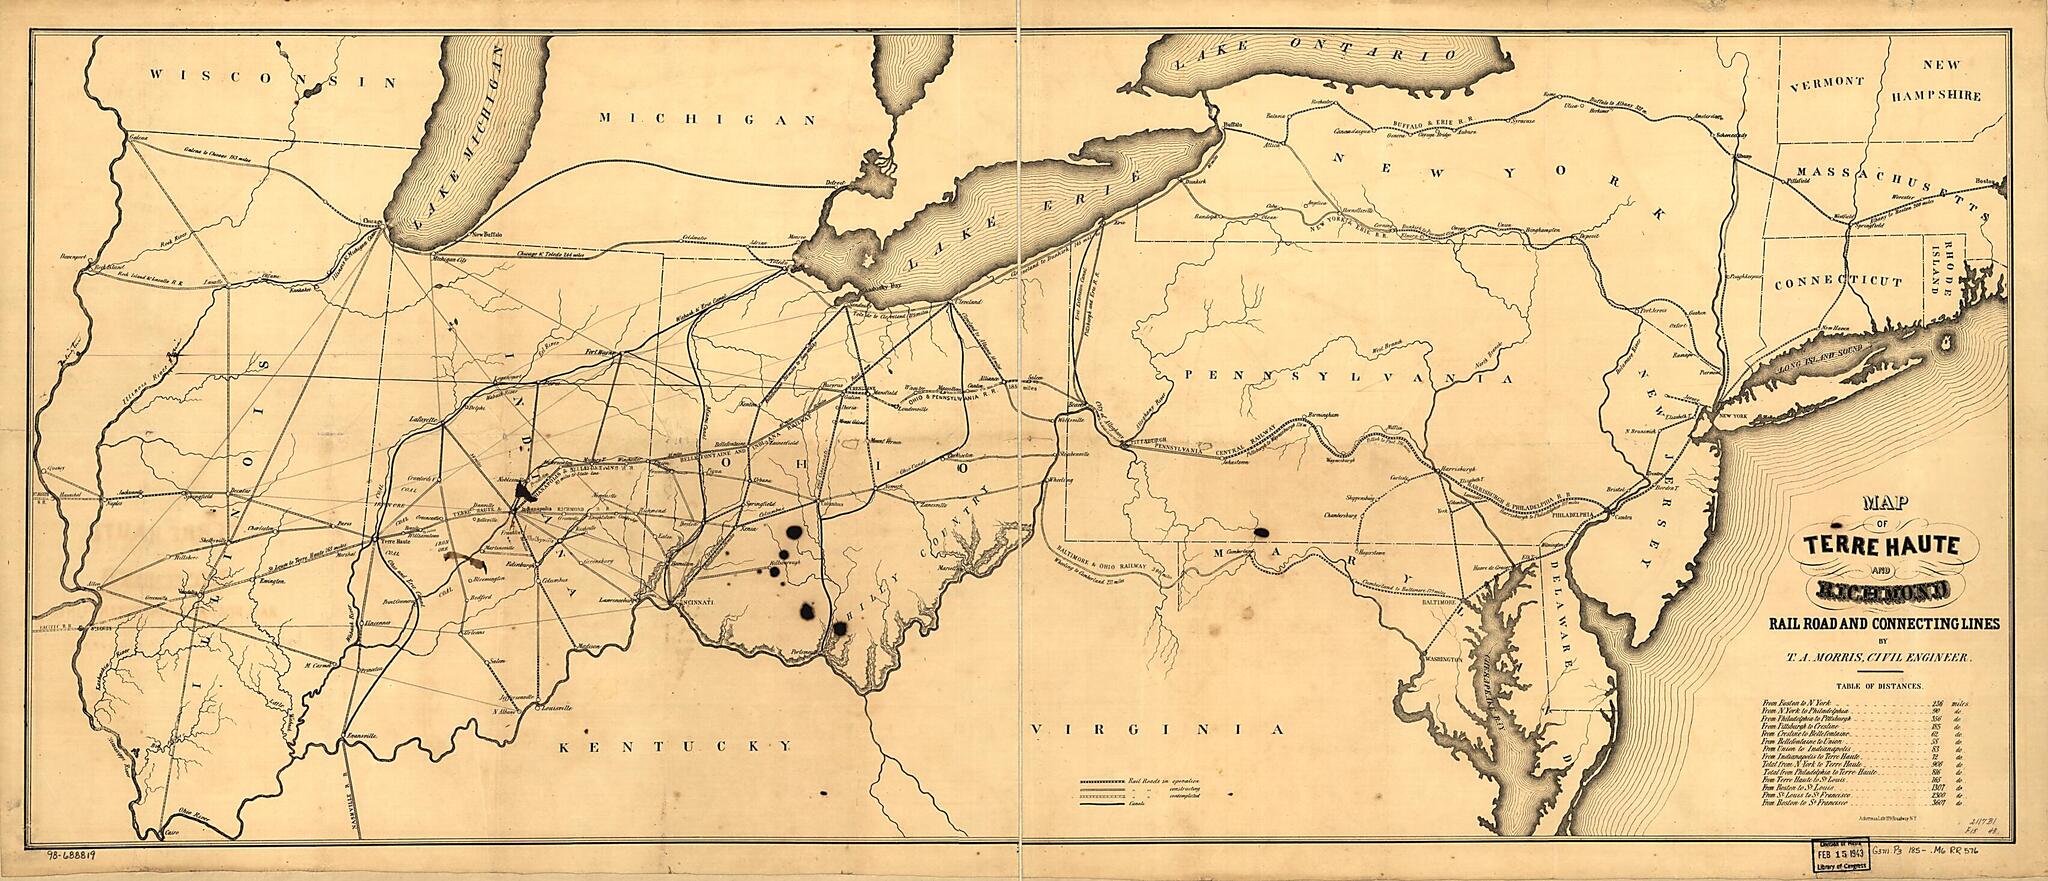 This old map of Map of Terre Haute and Richmond Rail Road and Connecting Lines from 1850 was created by Thomas A. (Thomas Armstrong) Morris,  Terre Haute and Richmond Railroad in 1850